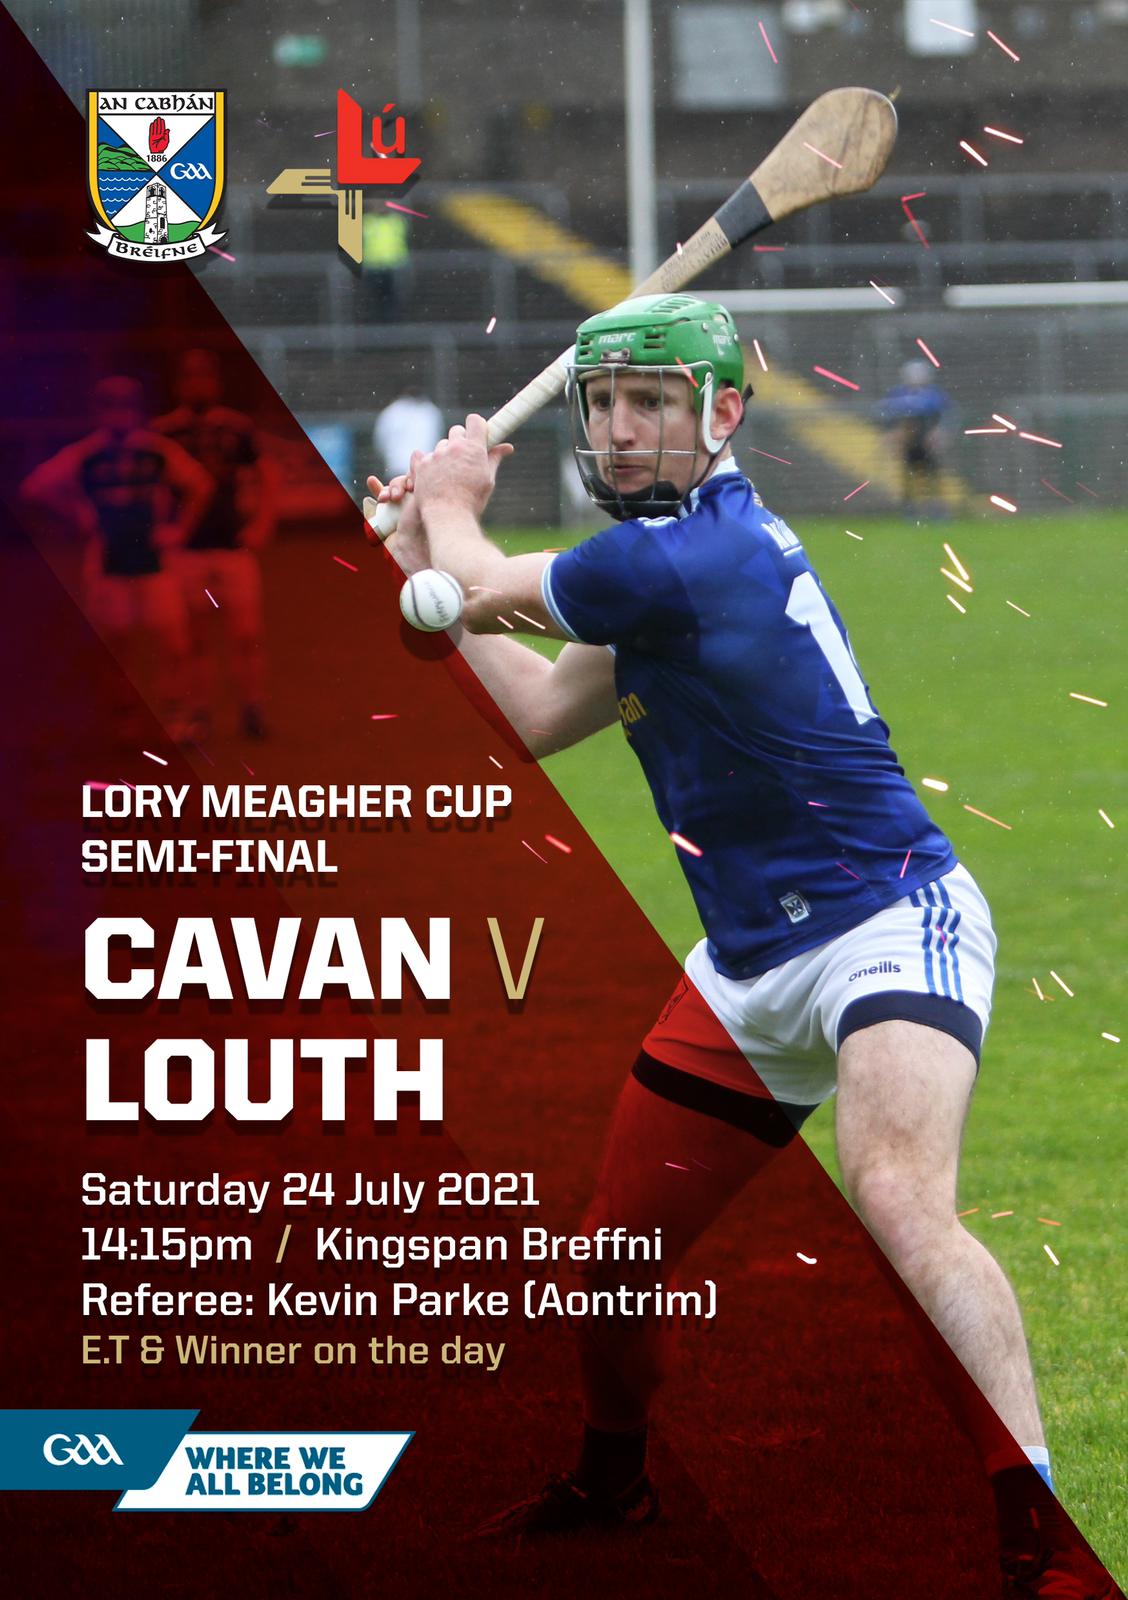 Programme v Louth Lory Meagher Semi Final